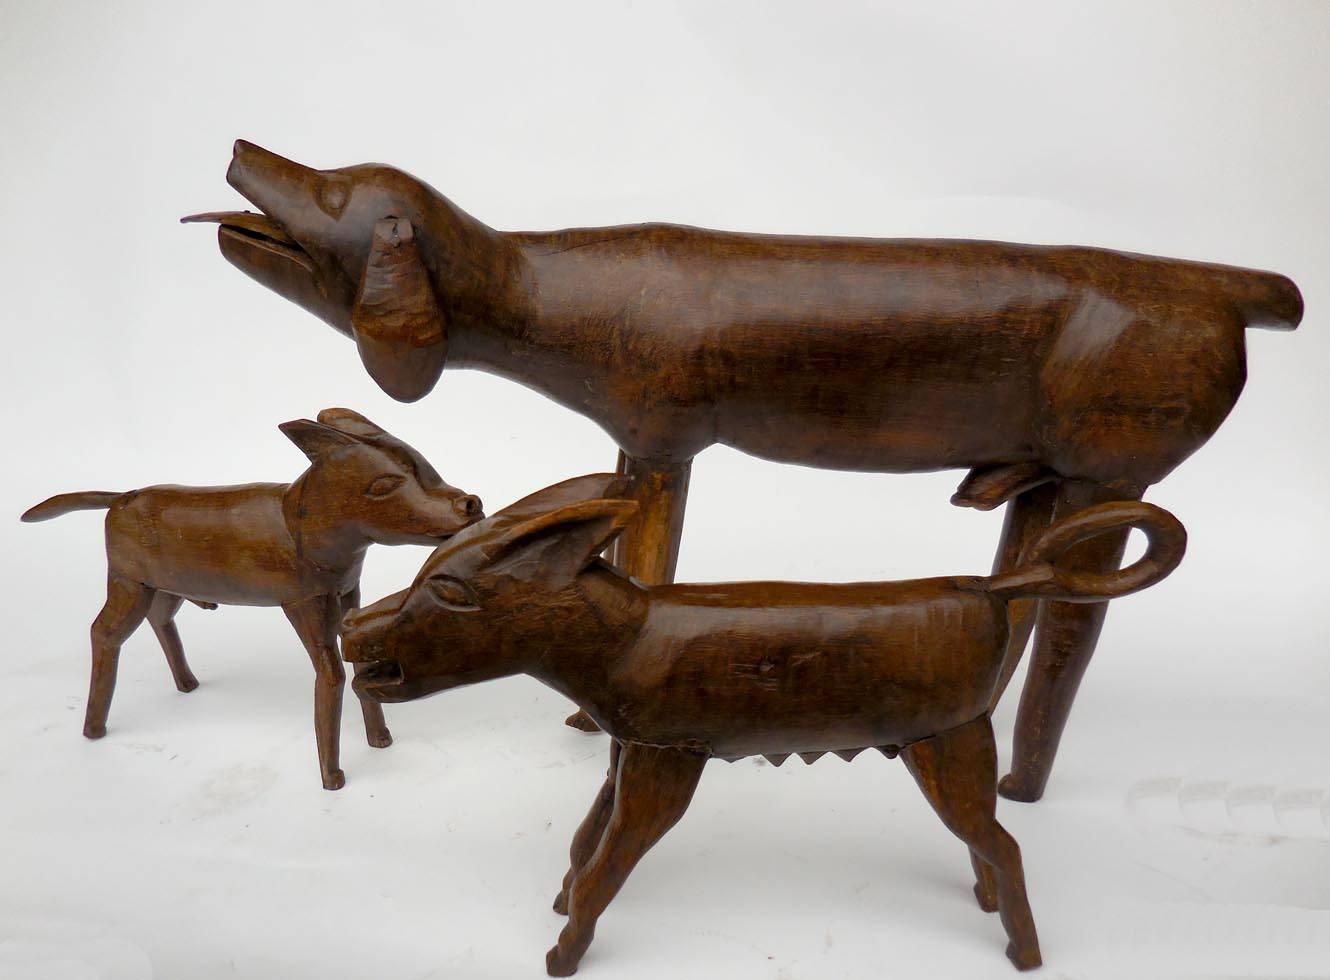 Single dad dog family!
Great carved wooden dogs from Guatemala. Anatomically correct details on faces and bodies! Dad measures 27x6.5x16.75H, female measures 16.50x2.5x10H and male measures 17x4.5x10.25H
These dogs come with a hand forged iron